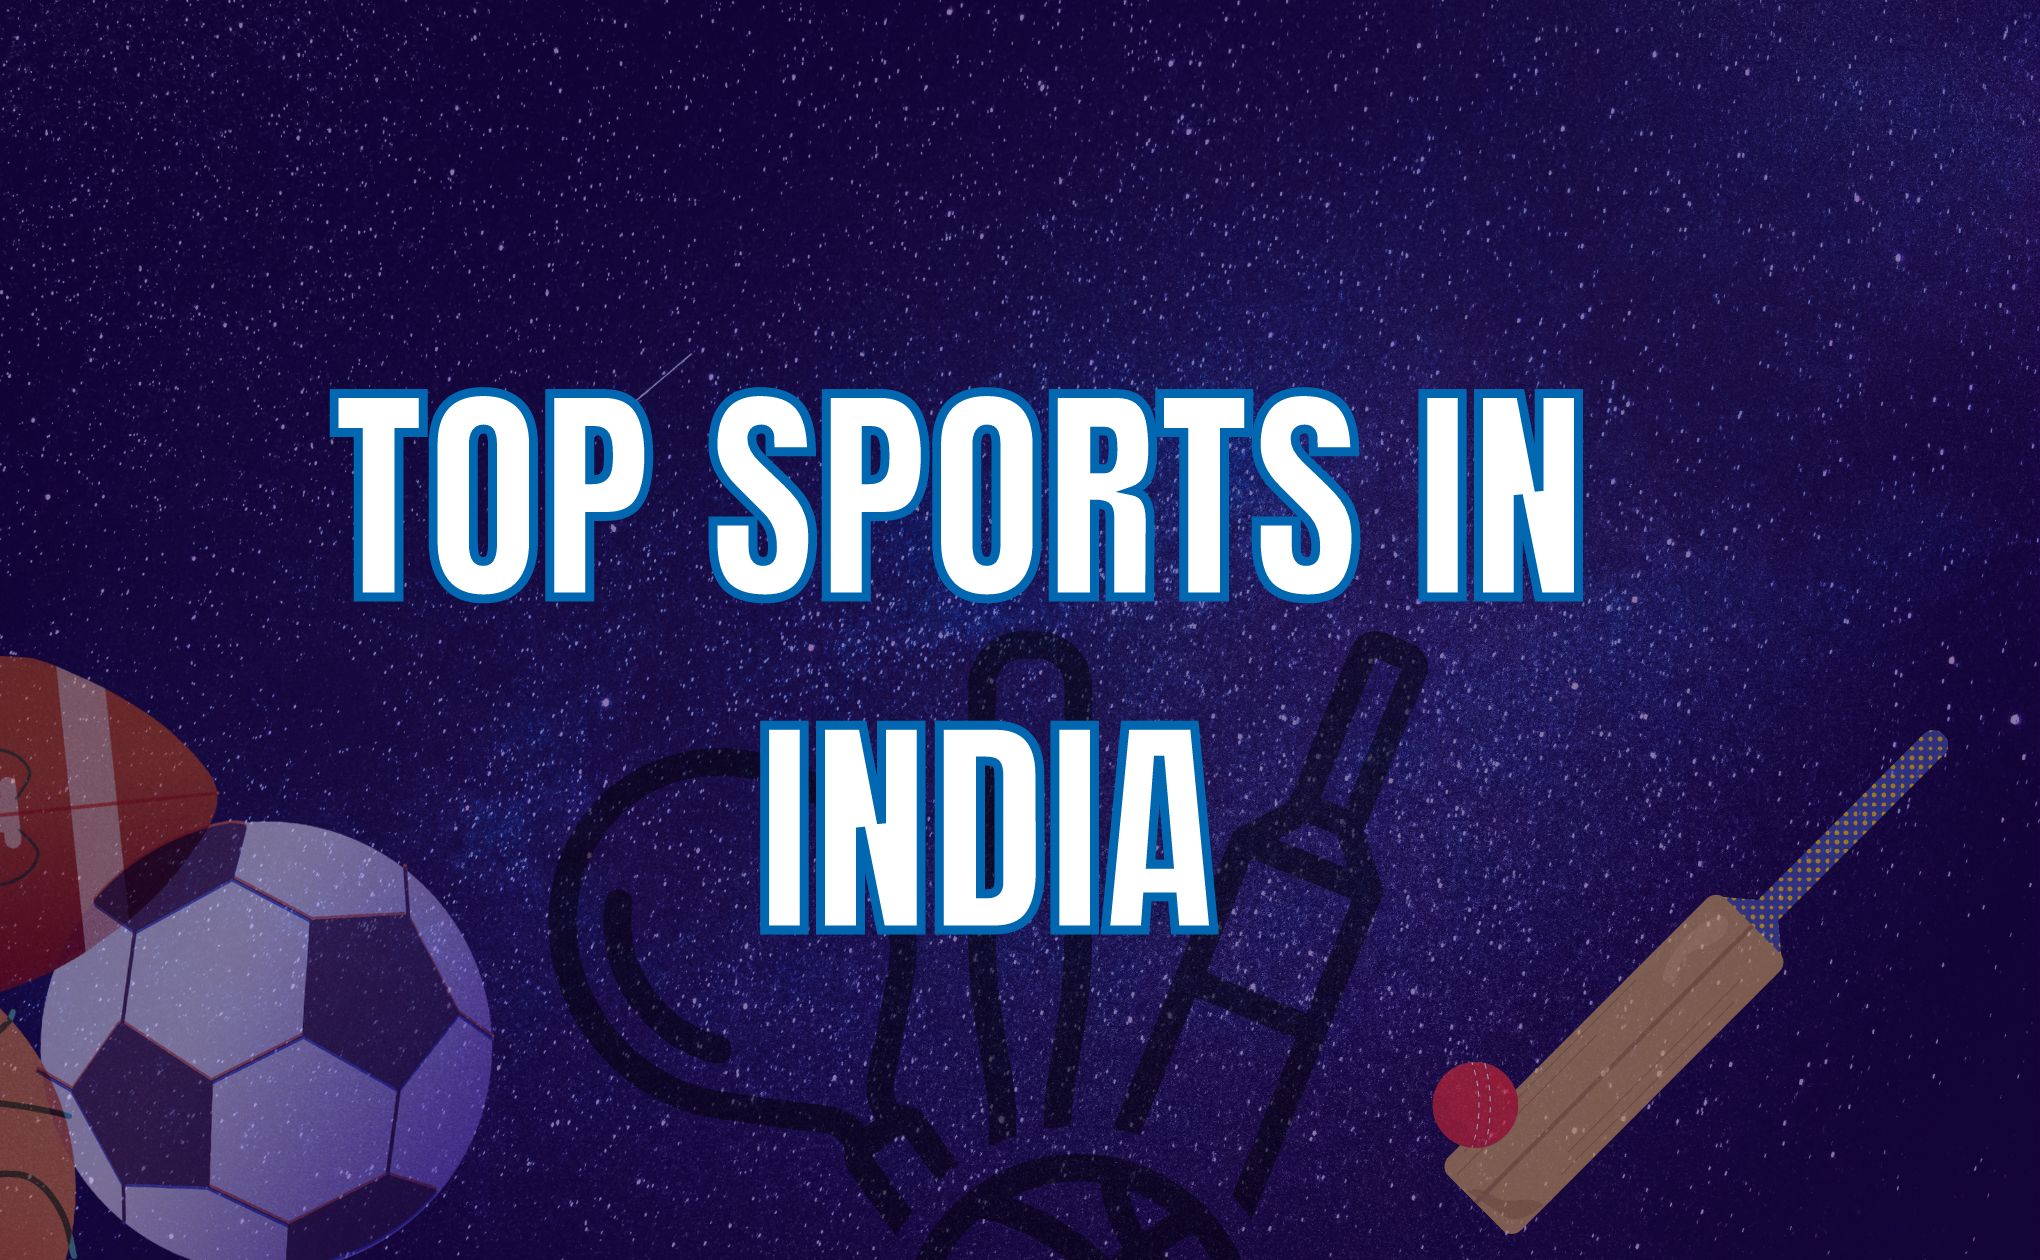 TOP SPORTS IN INDIA